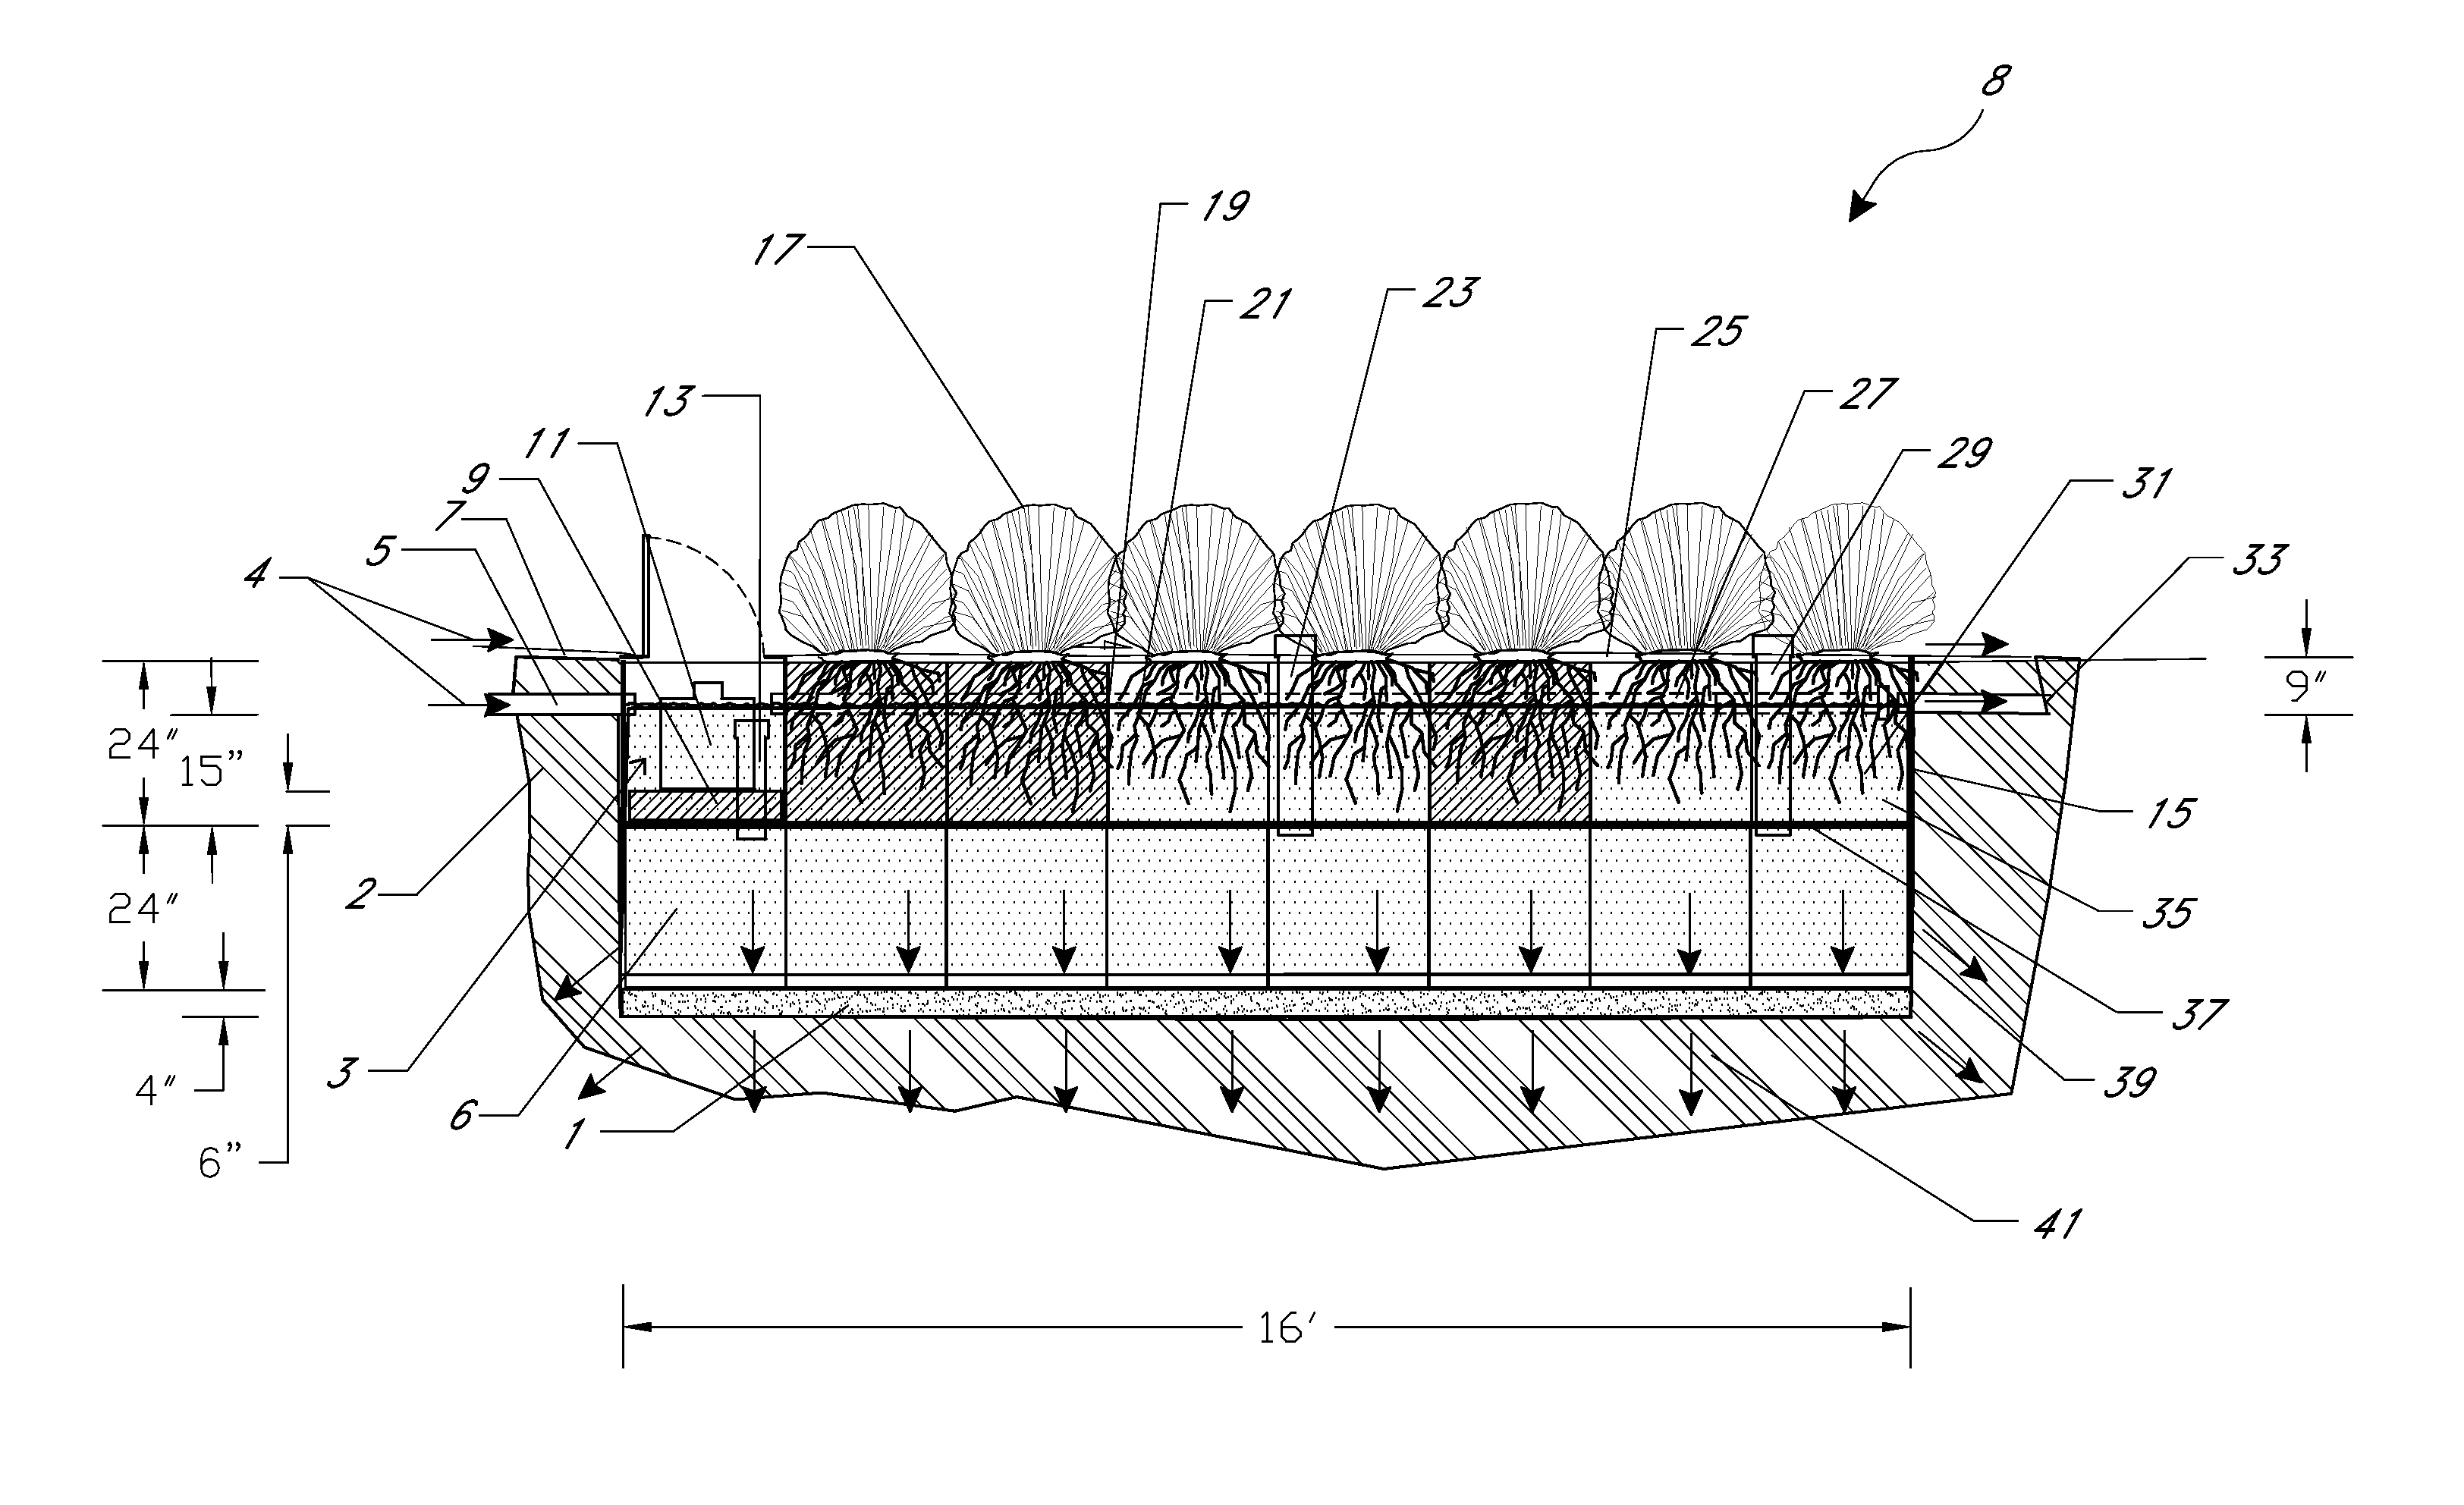 Modular high performance bioswale and water treatment system and method